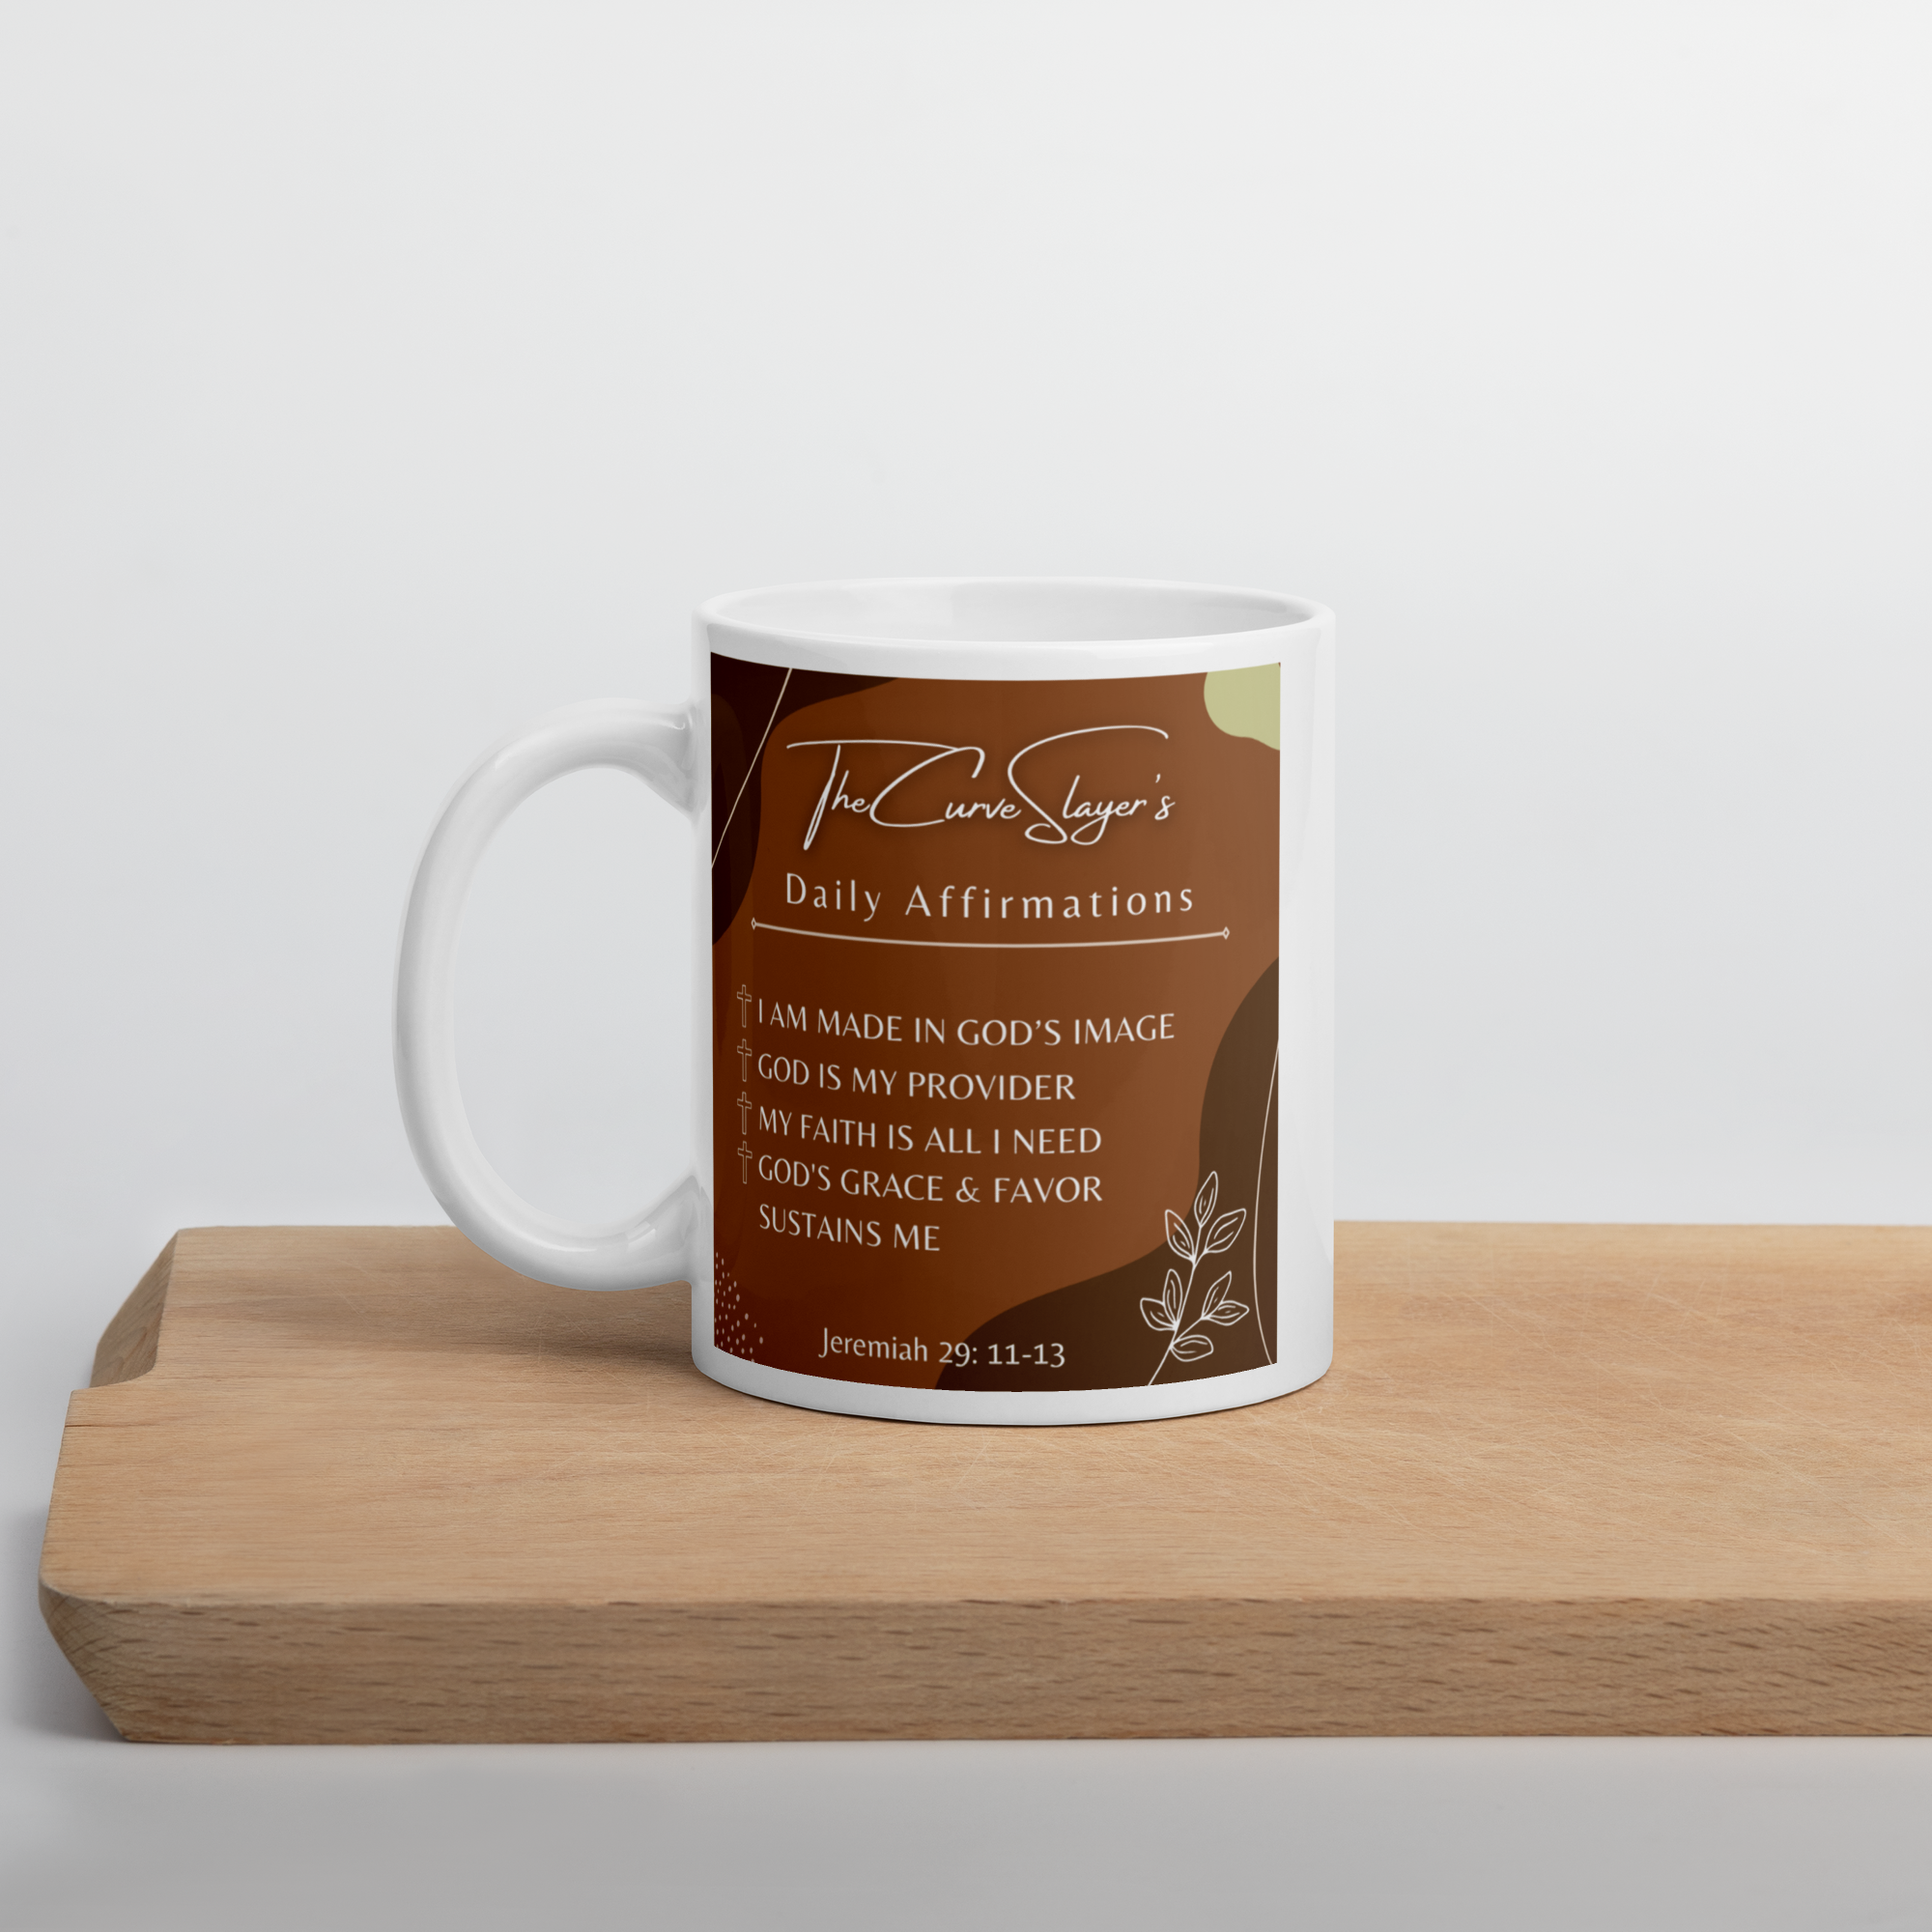 TheCurveSlayer's Daily Affirmations Coffee Mug (Glossy White)